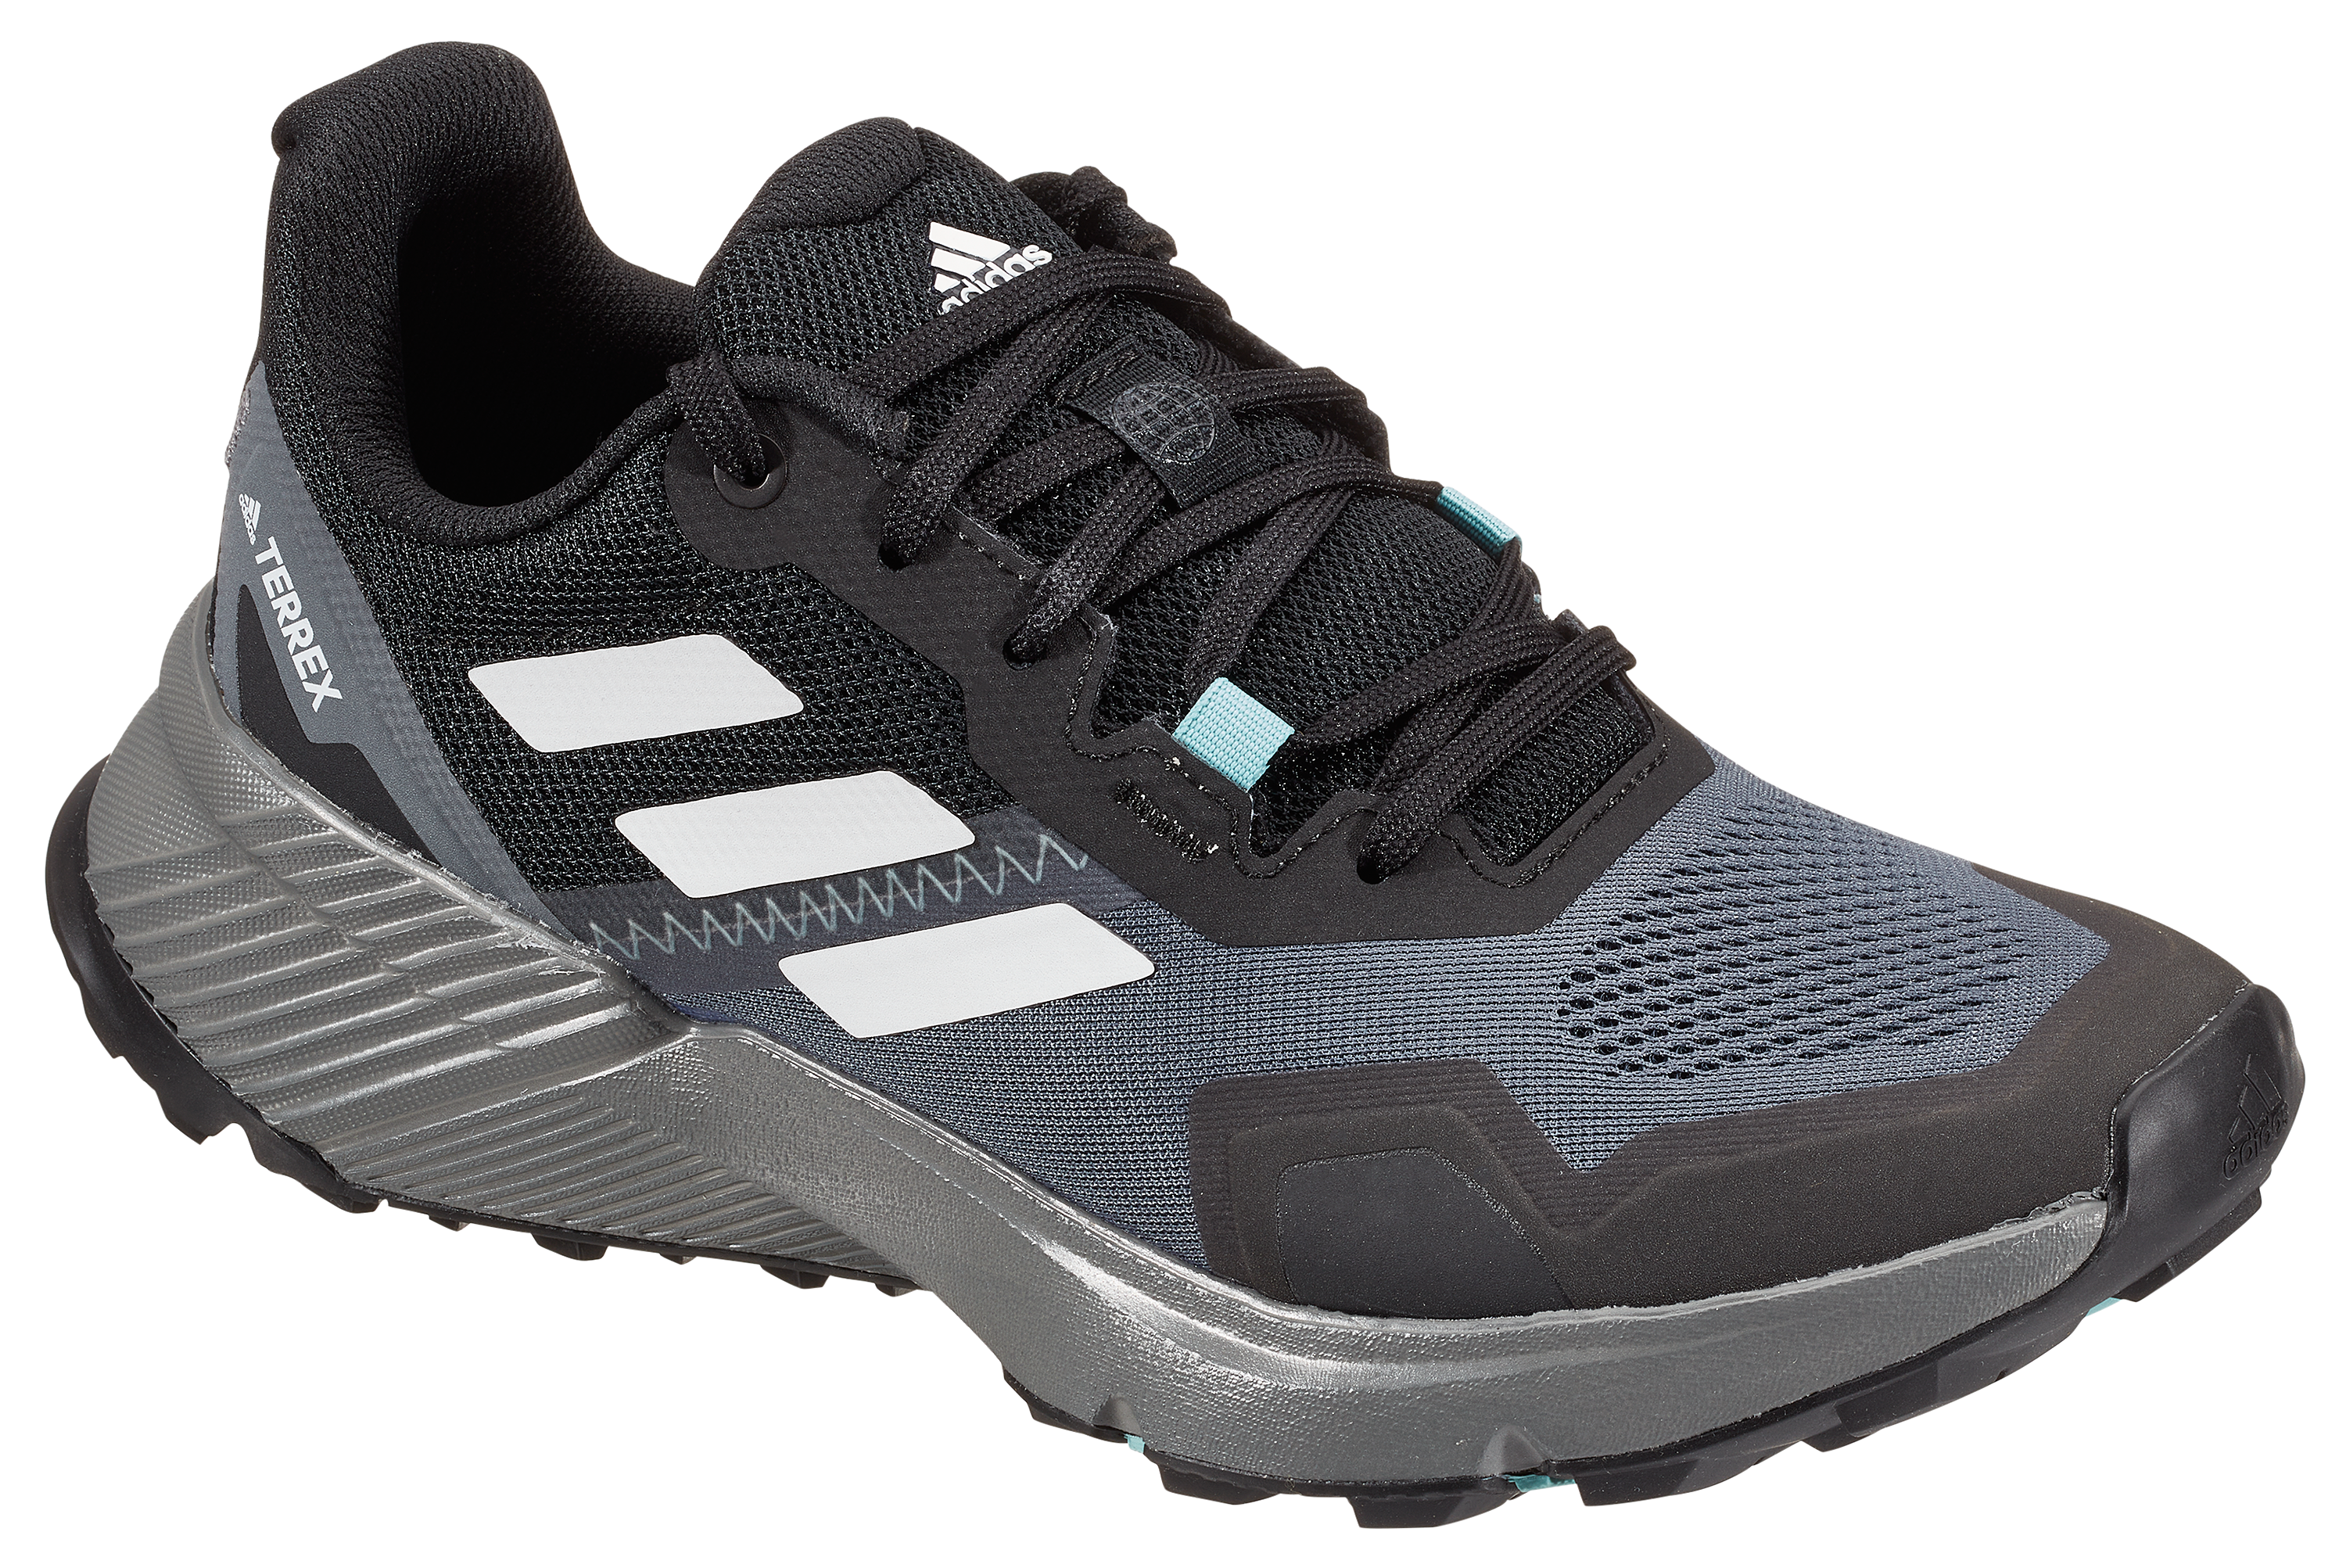 Adidas Soulstride Trail Running Shoes | Bass Pro Shops